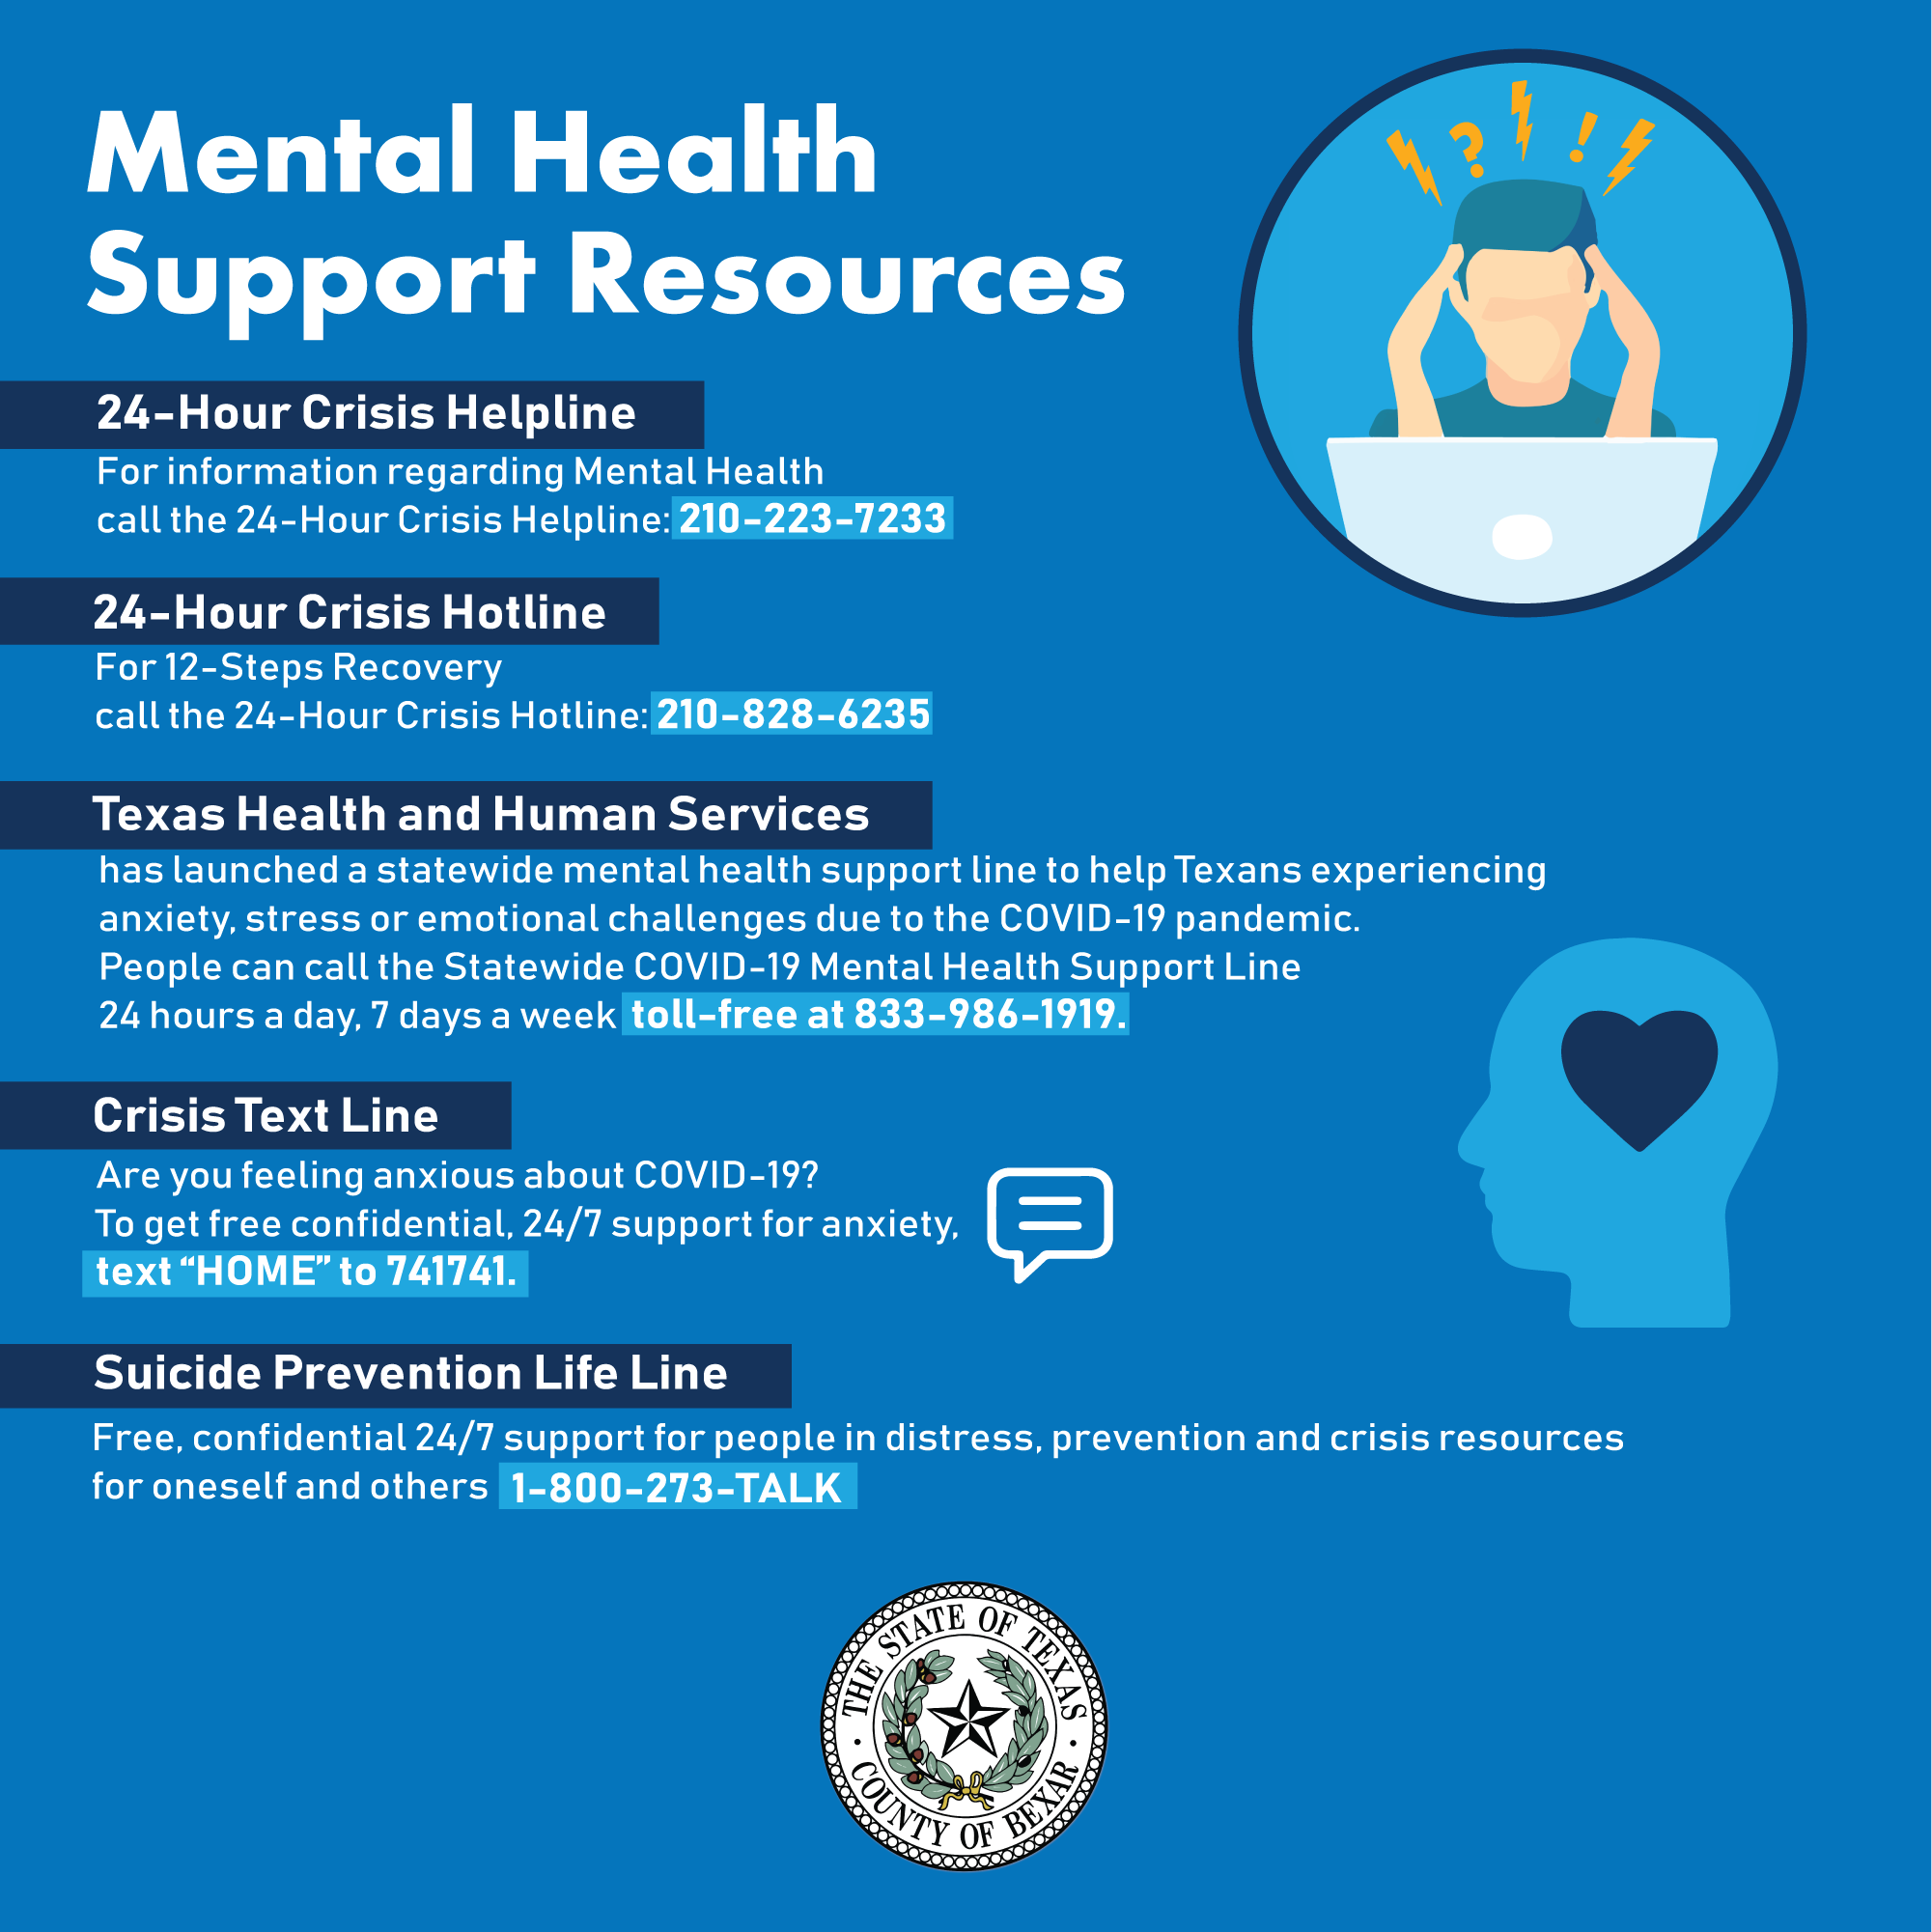 Get help - free, 24/7, confidential mental health text support